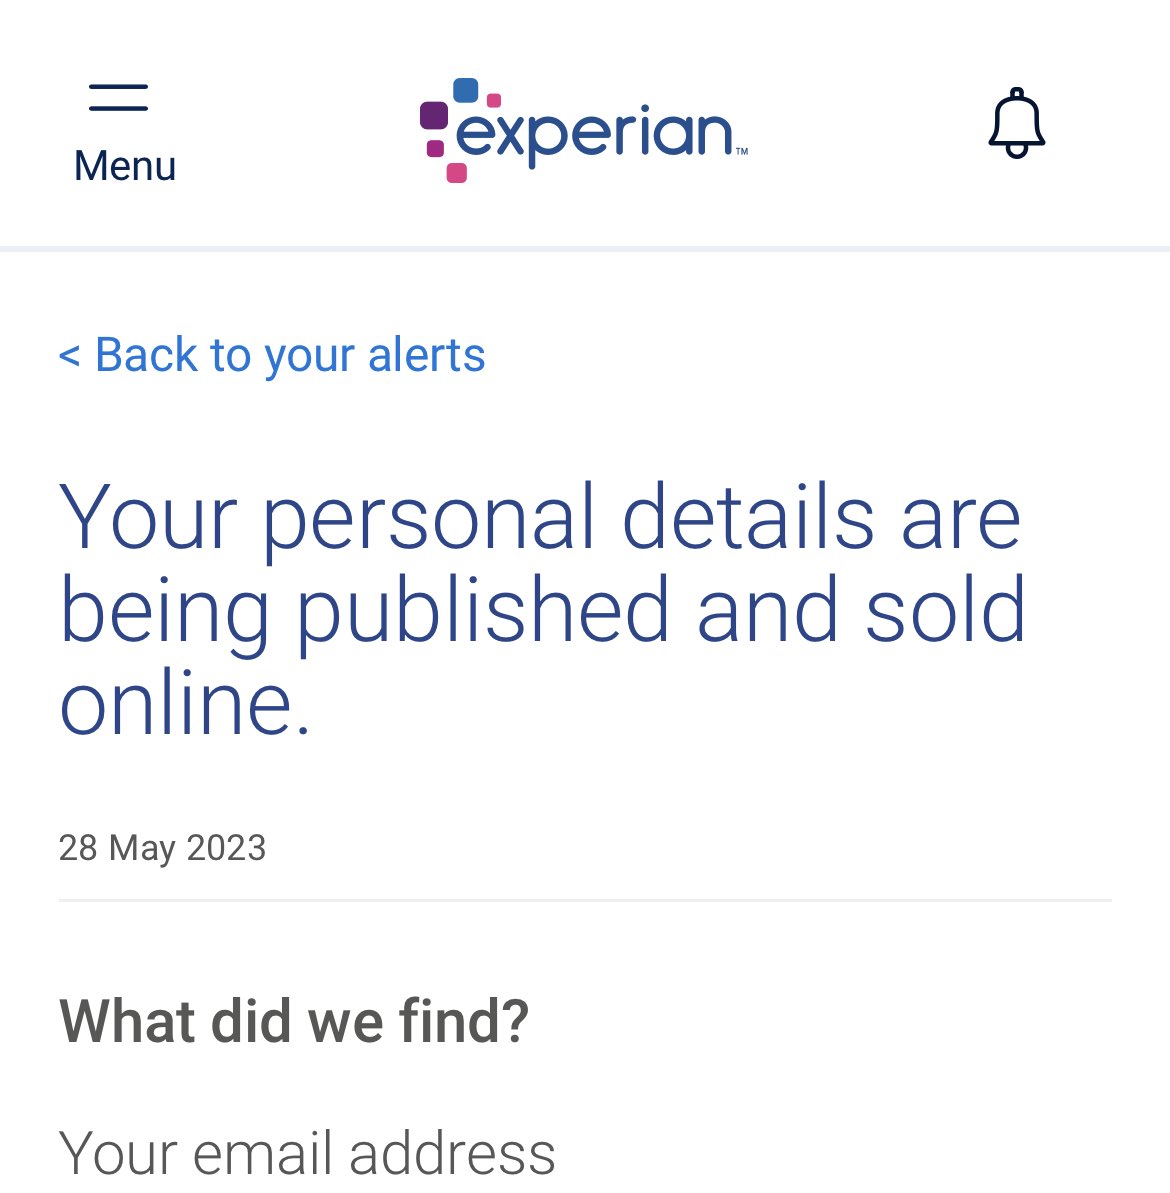 Thanks @USSpensions for exposing my personal data online.

Will you be compensating members? 12 months of Experian does not adequately cover the inconvenience and worry.